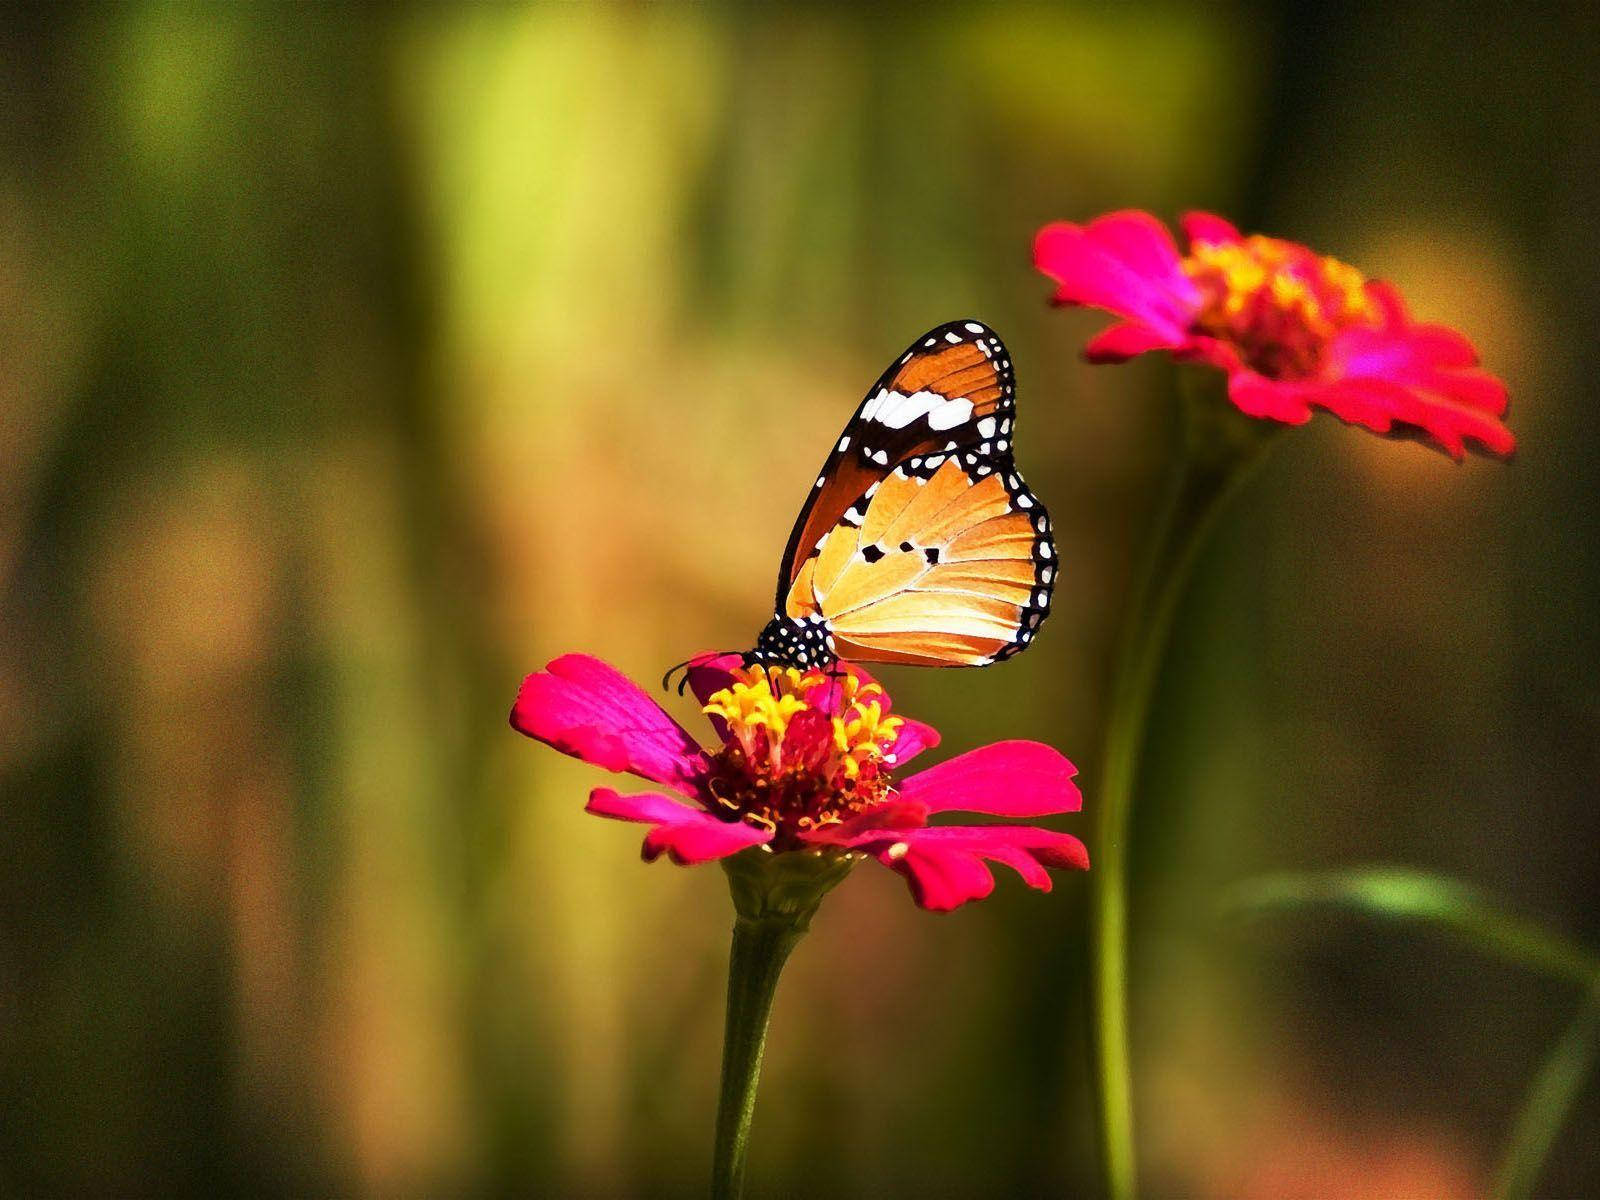 Flower Hd Pink Flower And Butterfly Background